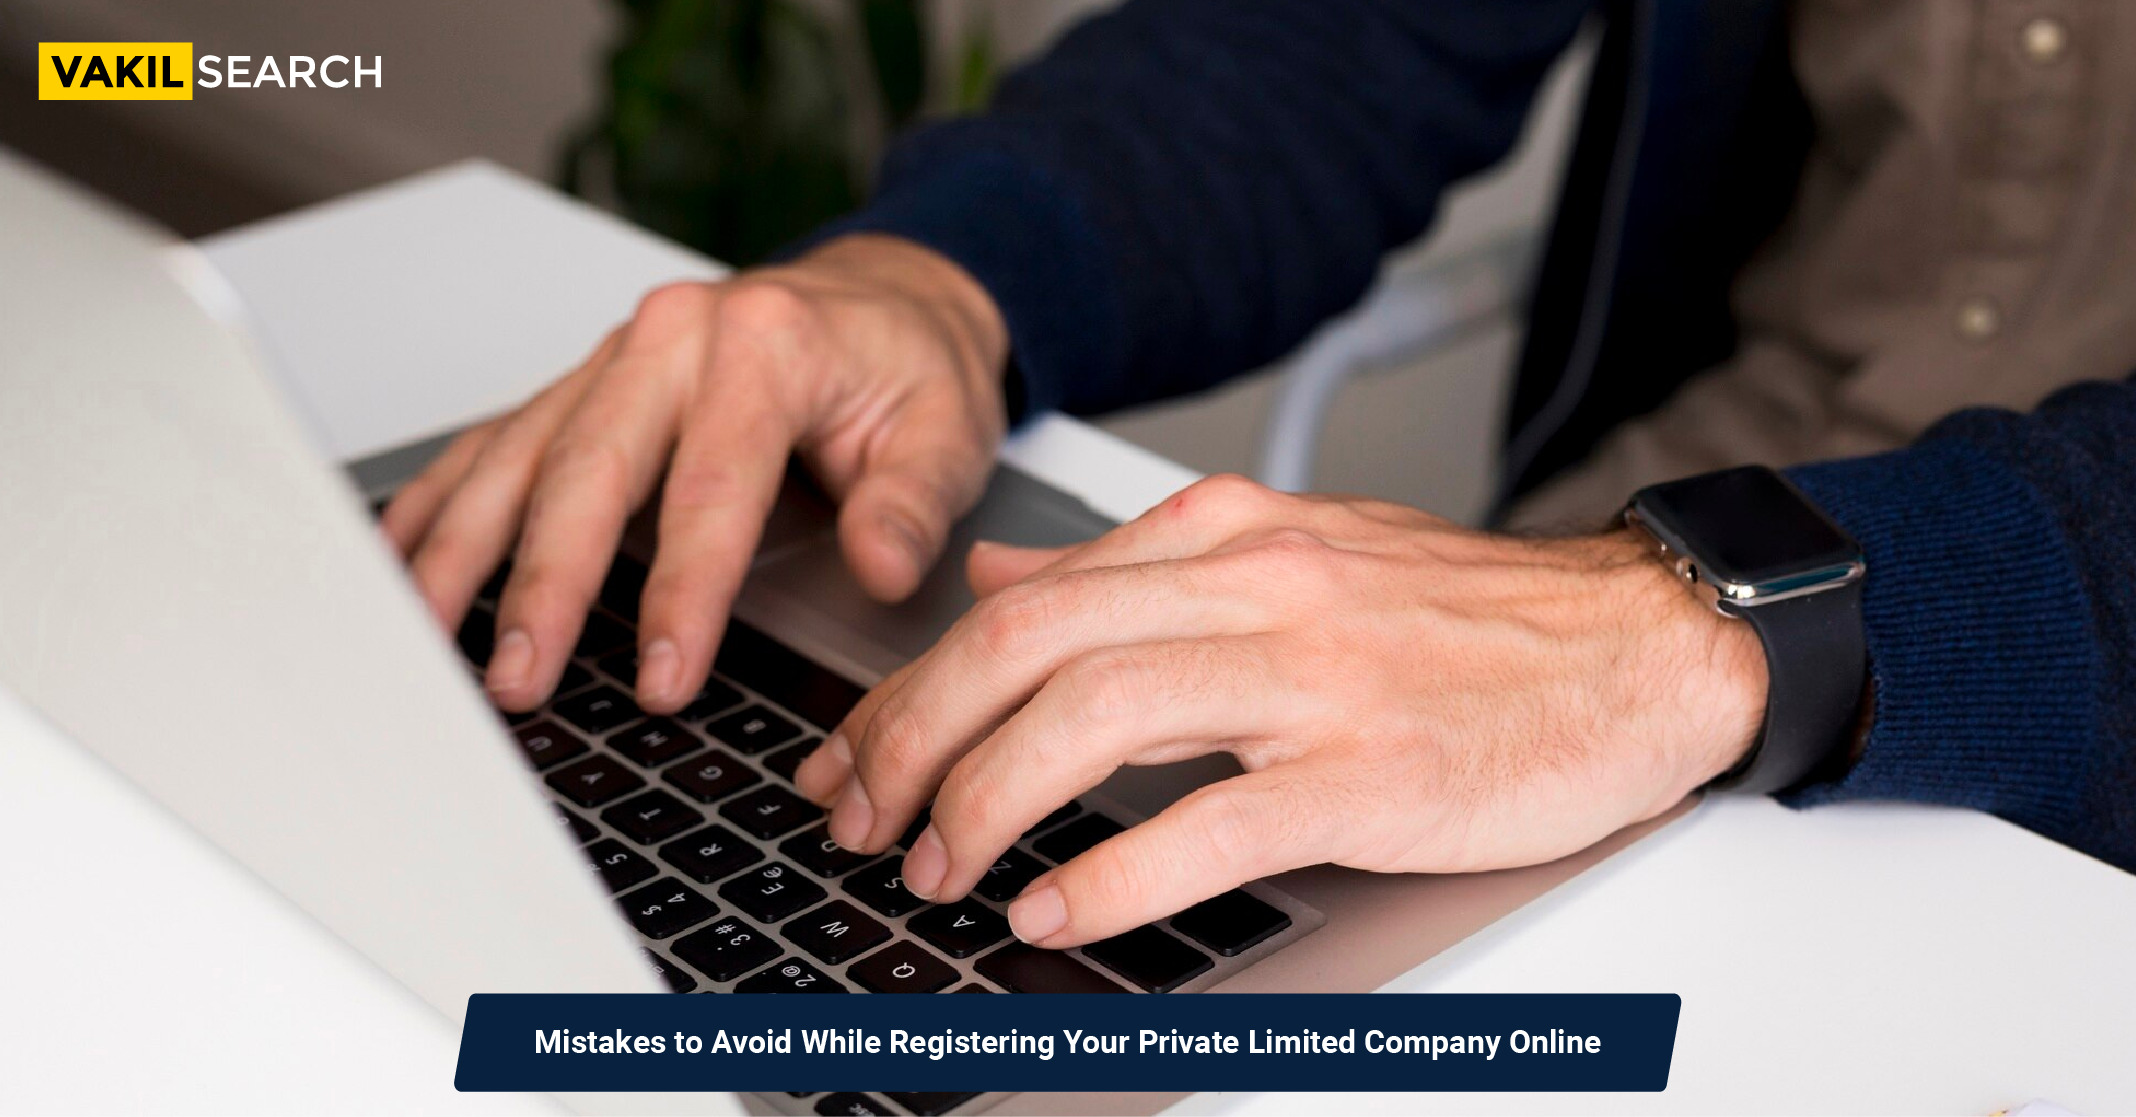 Mistakes to Avoid While Registering Your Private Limited Company Online